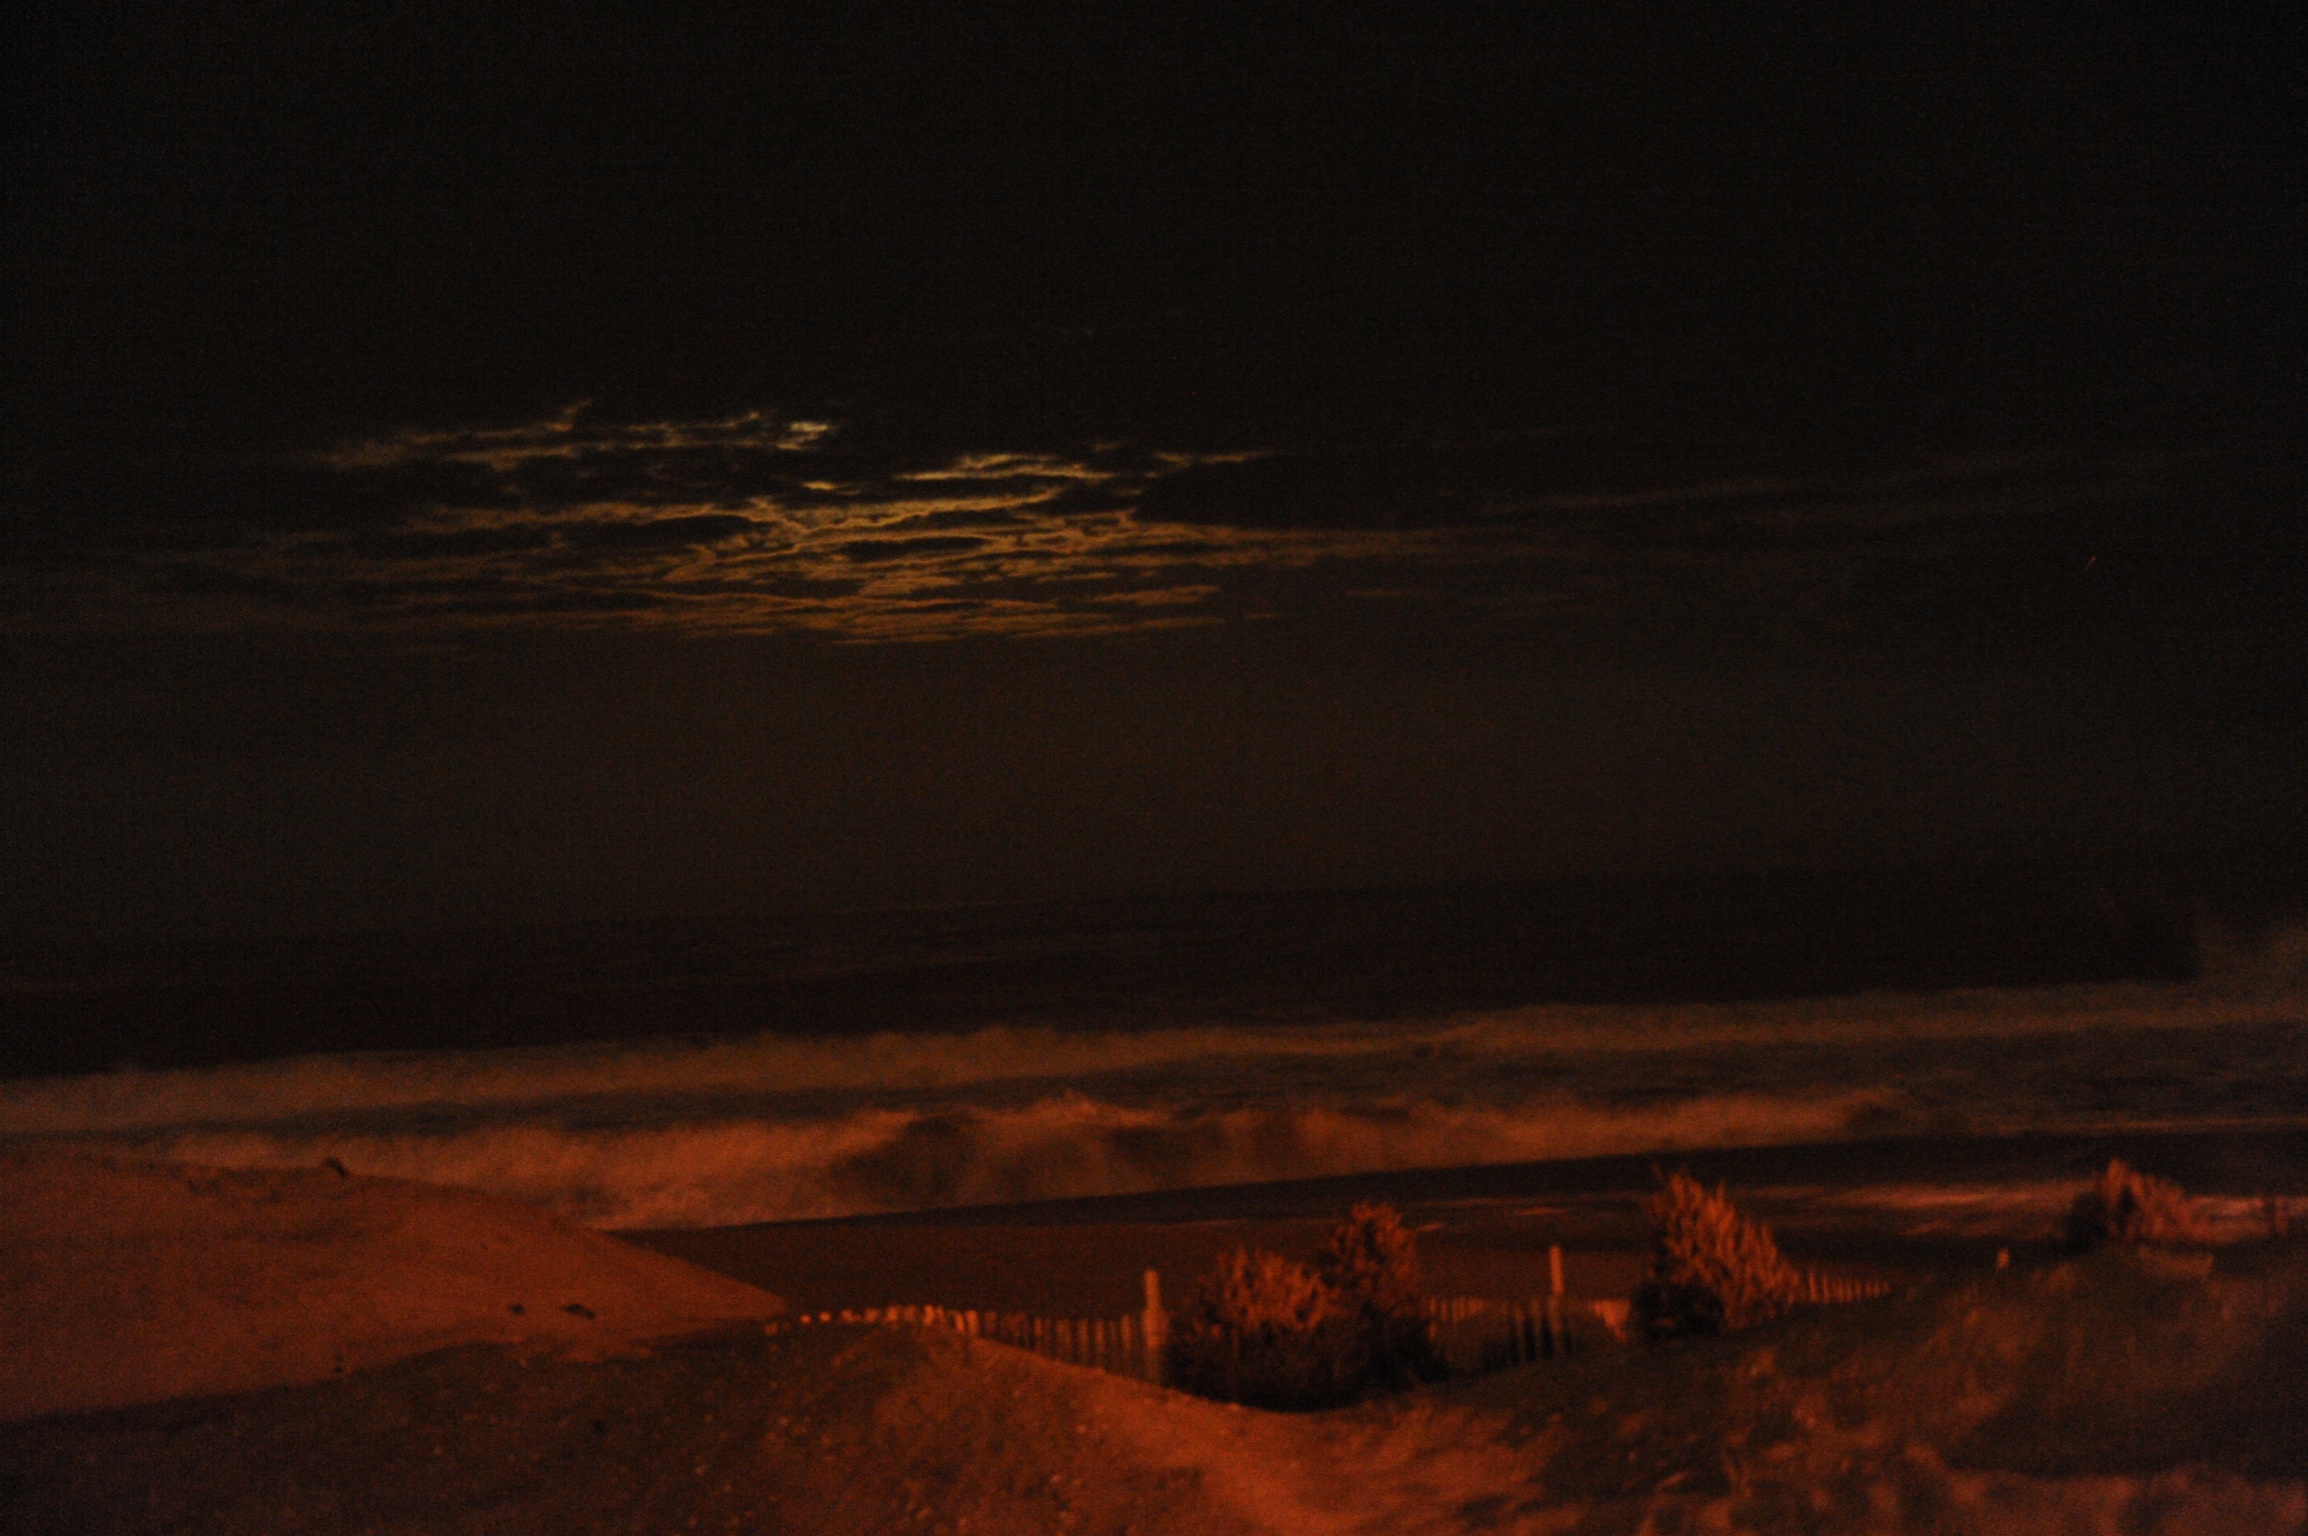 another view of the beach at night